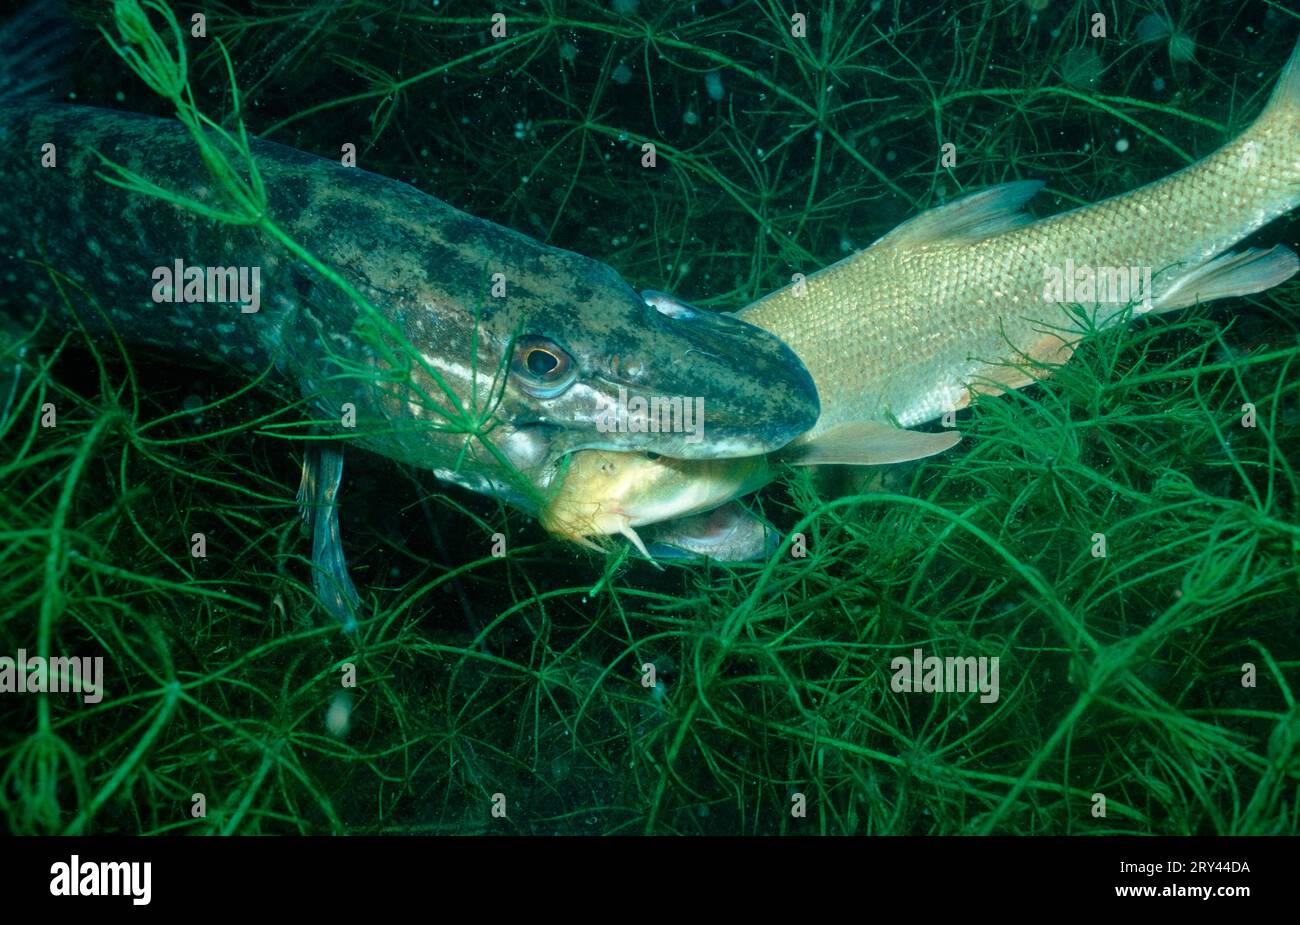 Northern Pike eating common barbel (Barbus barbus), Rhine, Pike (Esox lucius) eating common barbel, Rhine tributary, Gedde, Germany Stock Photo